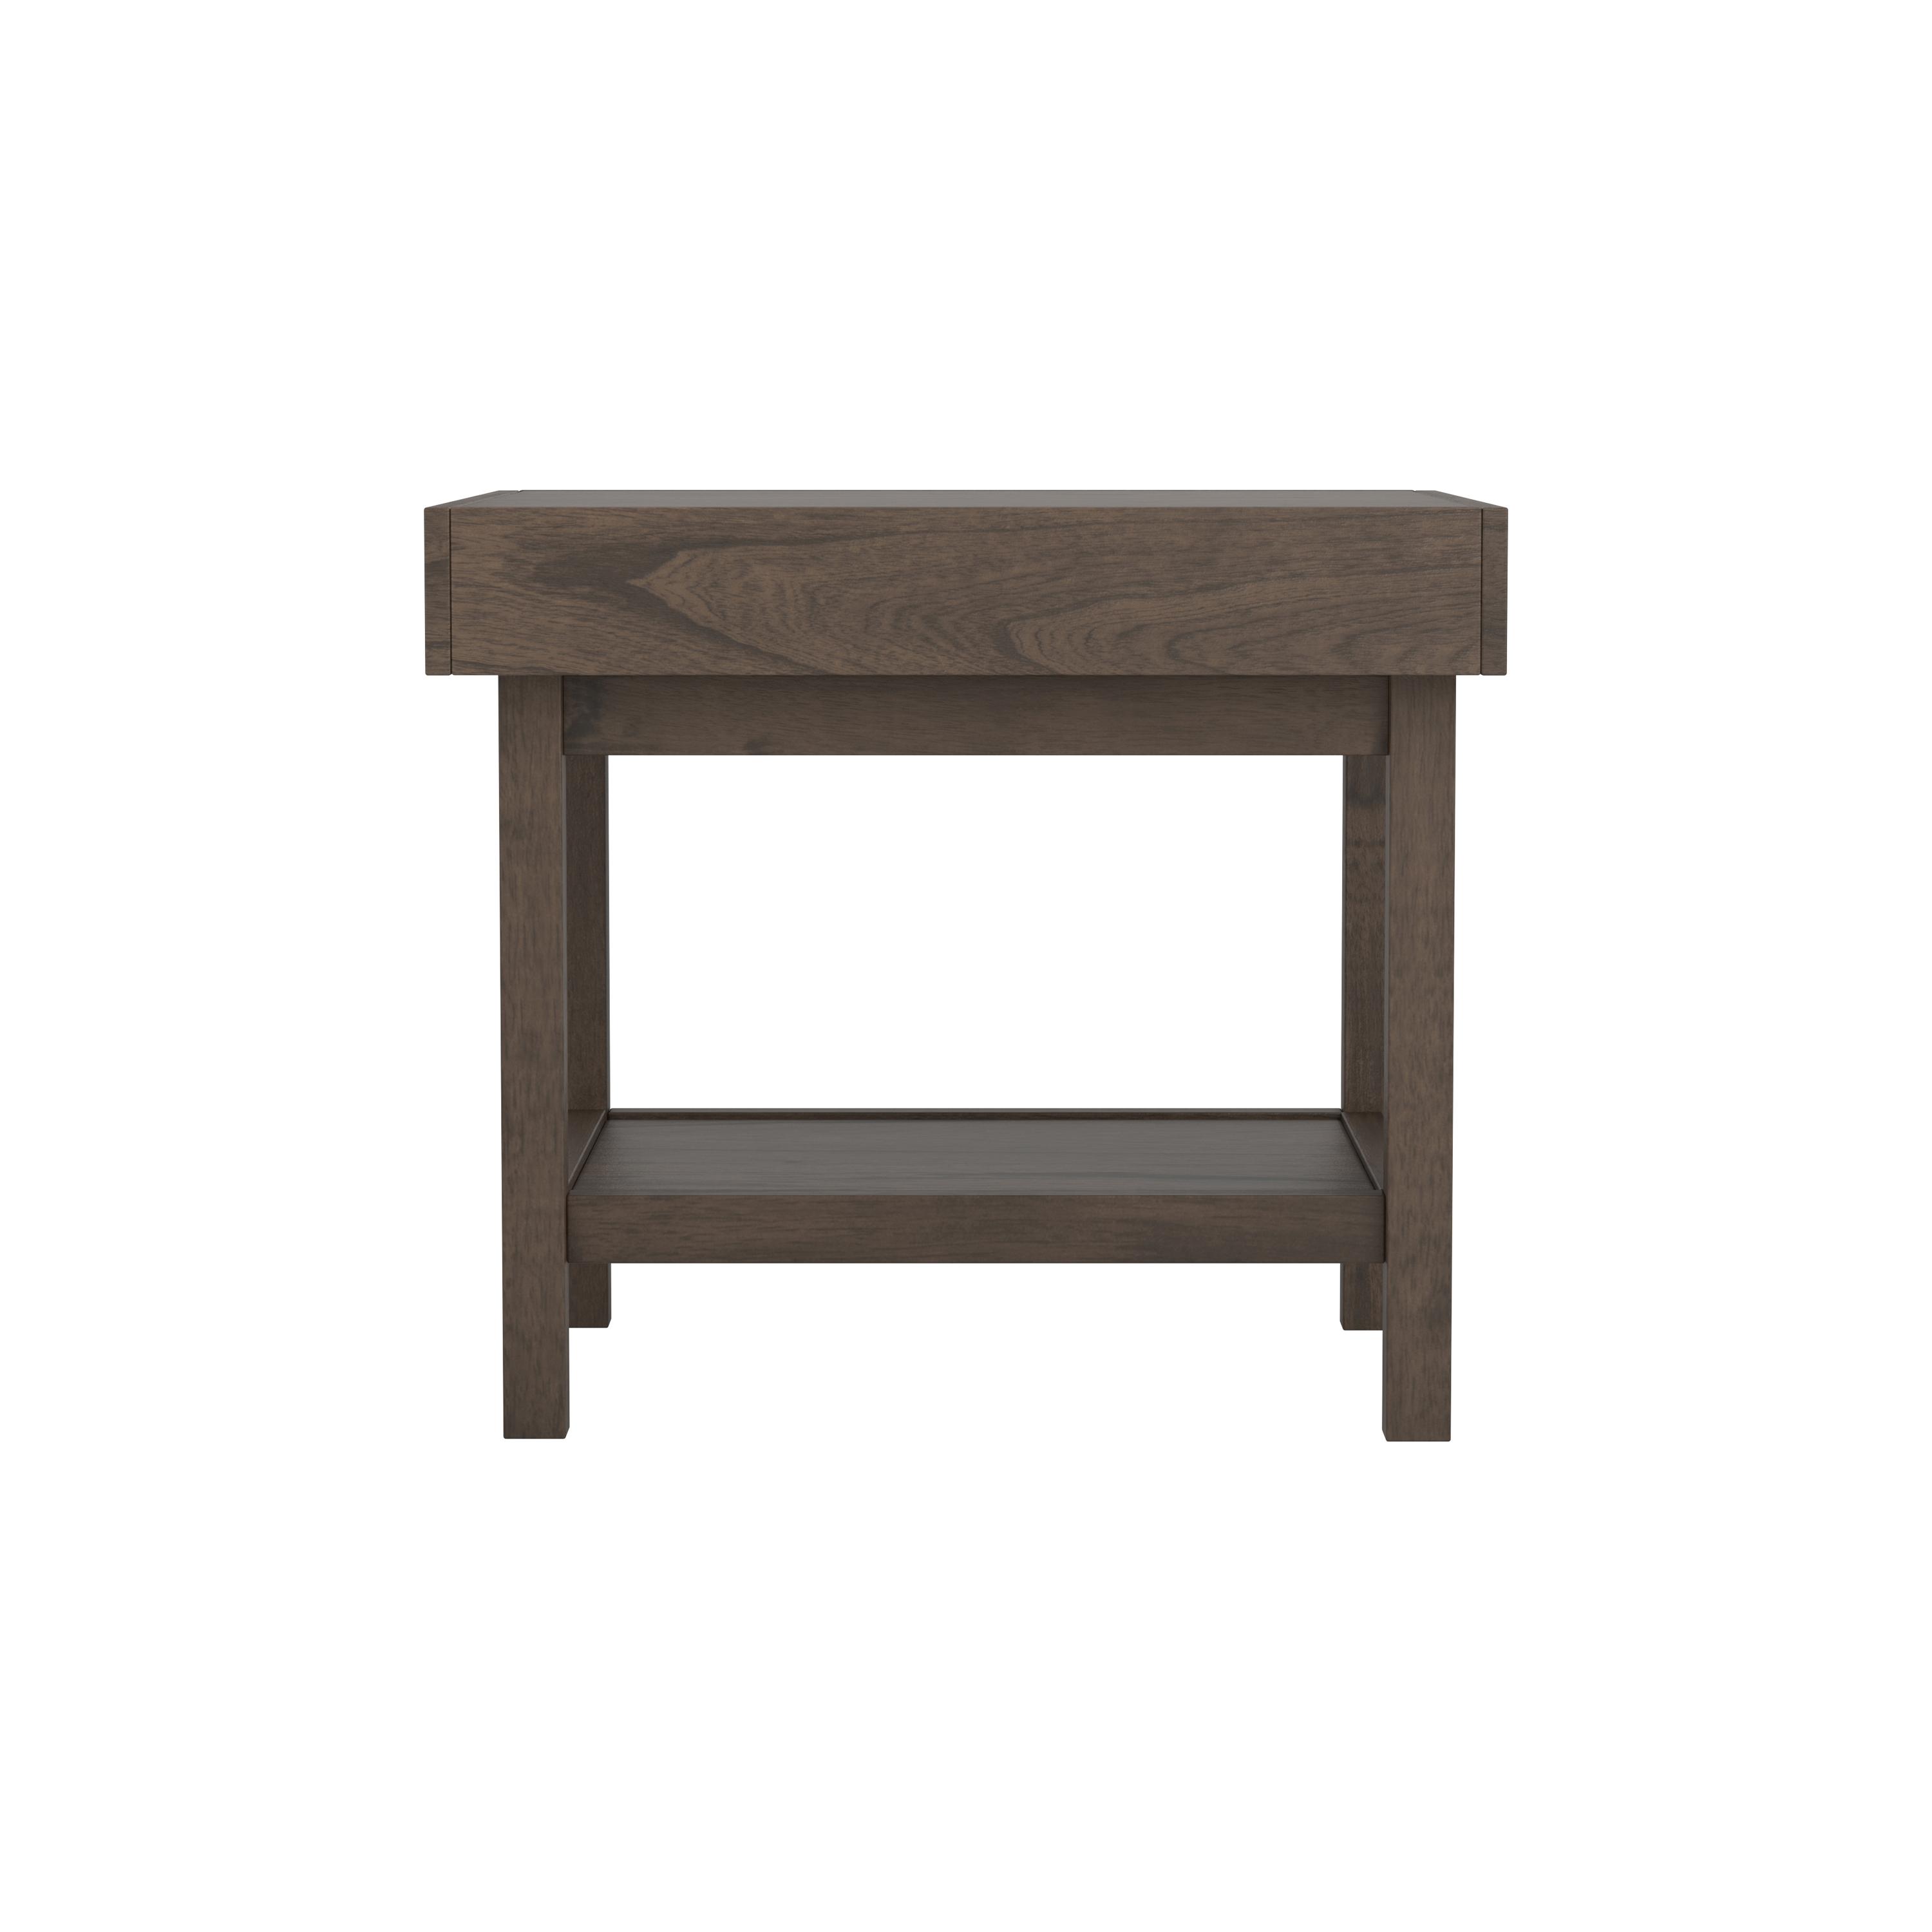 Modern End Table 723117 723117 in Brown 